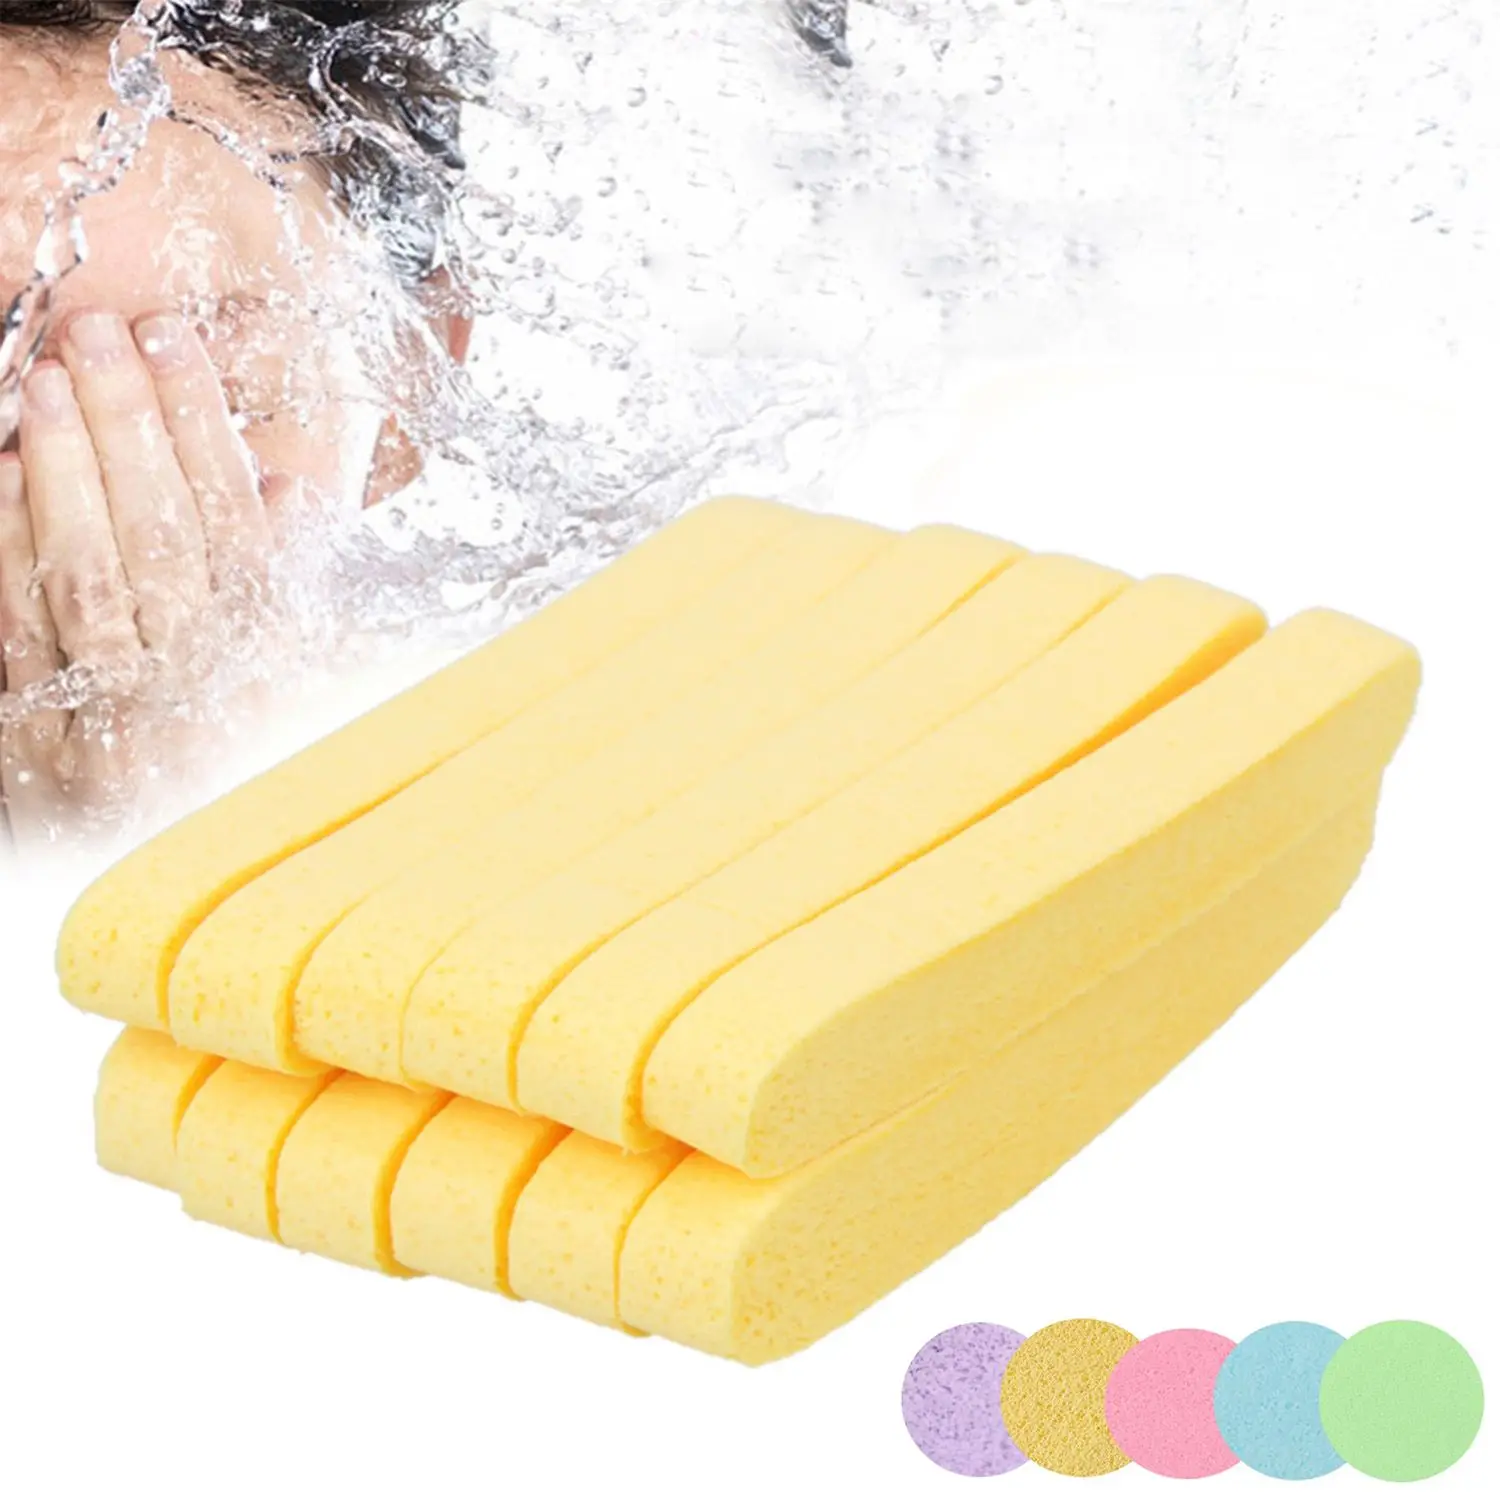 

12Pcs Facial Sponge Compressed Makeup Removal Face Wash Sponges Spa Pads Exfoliating Cleansing Pad Skin Care Tool Cosmetic Puff